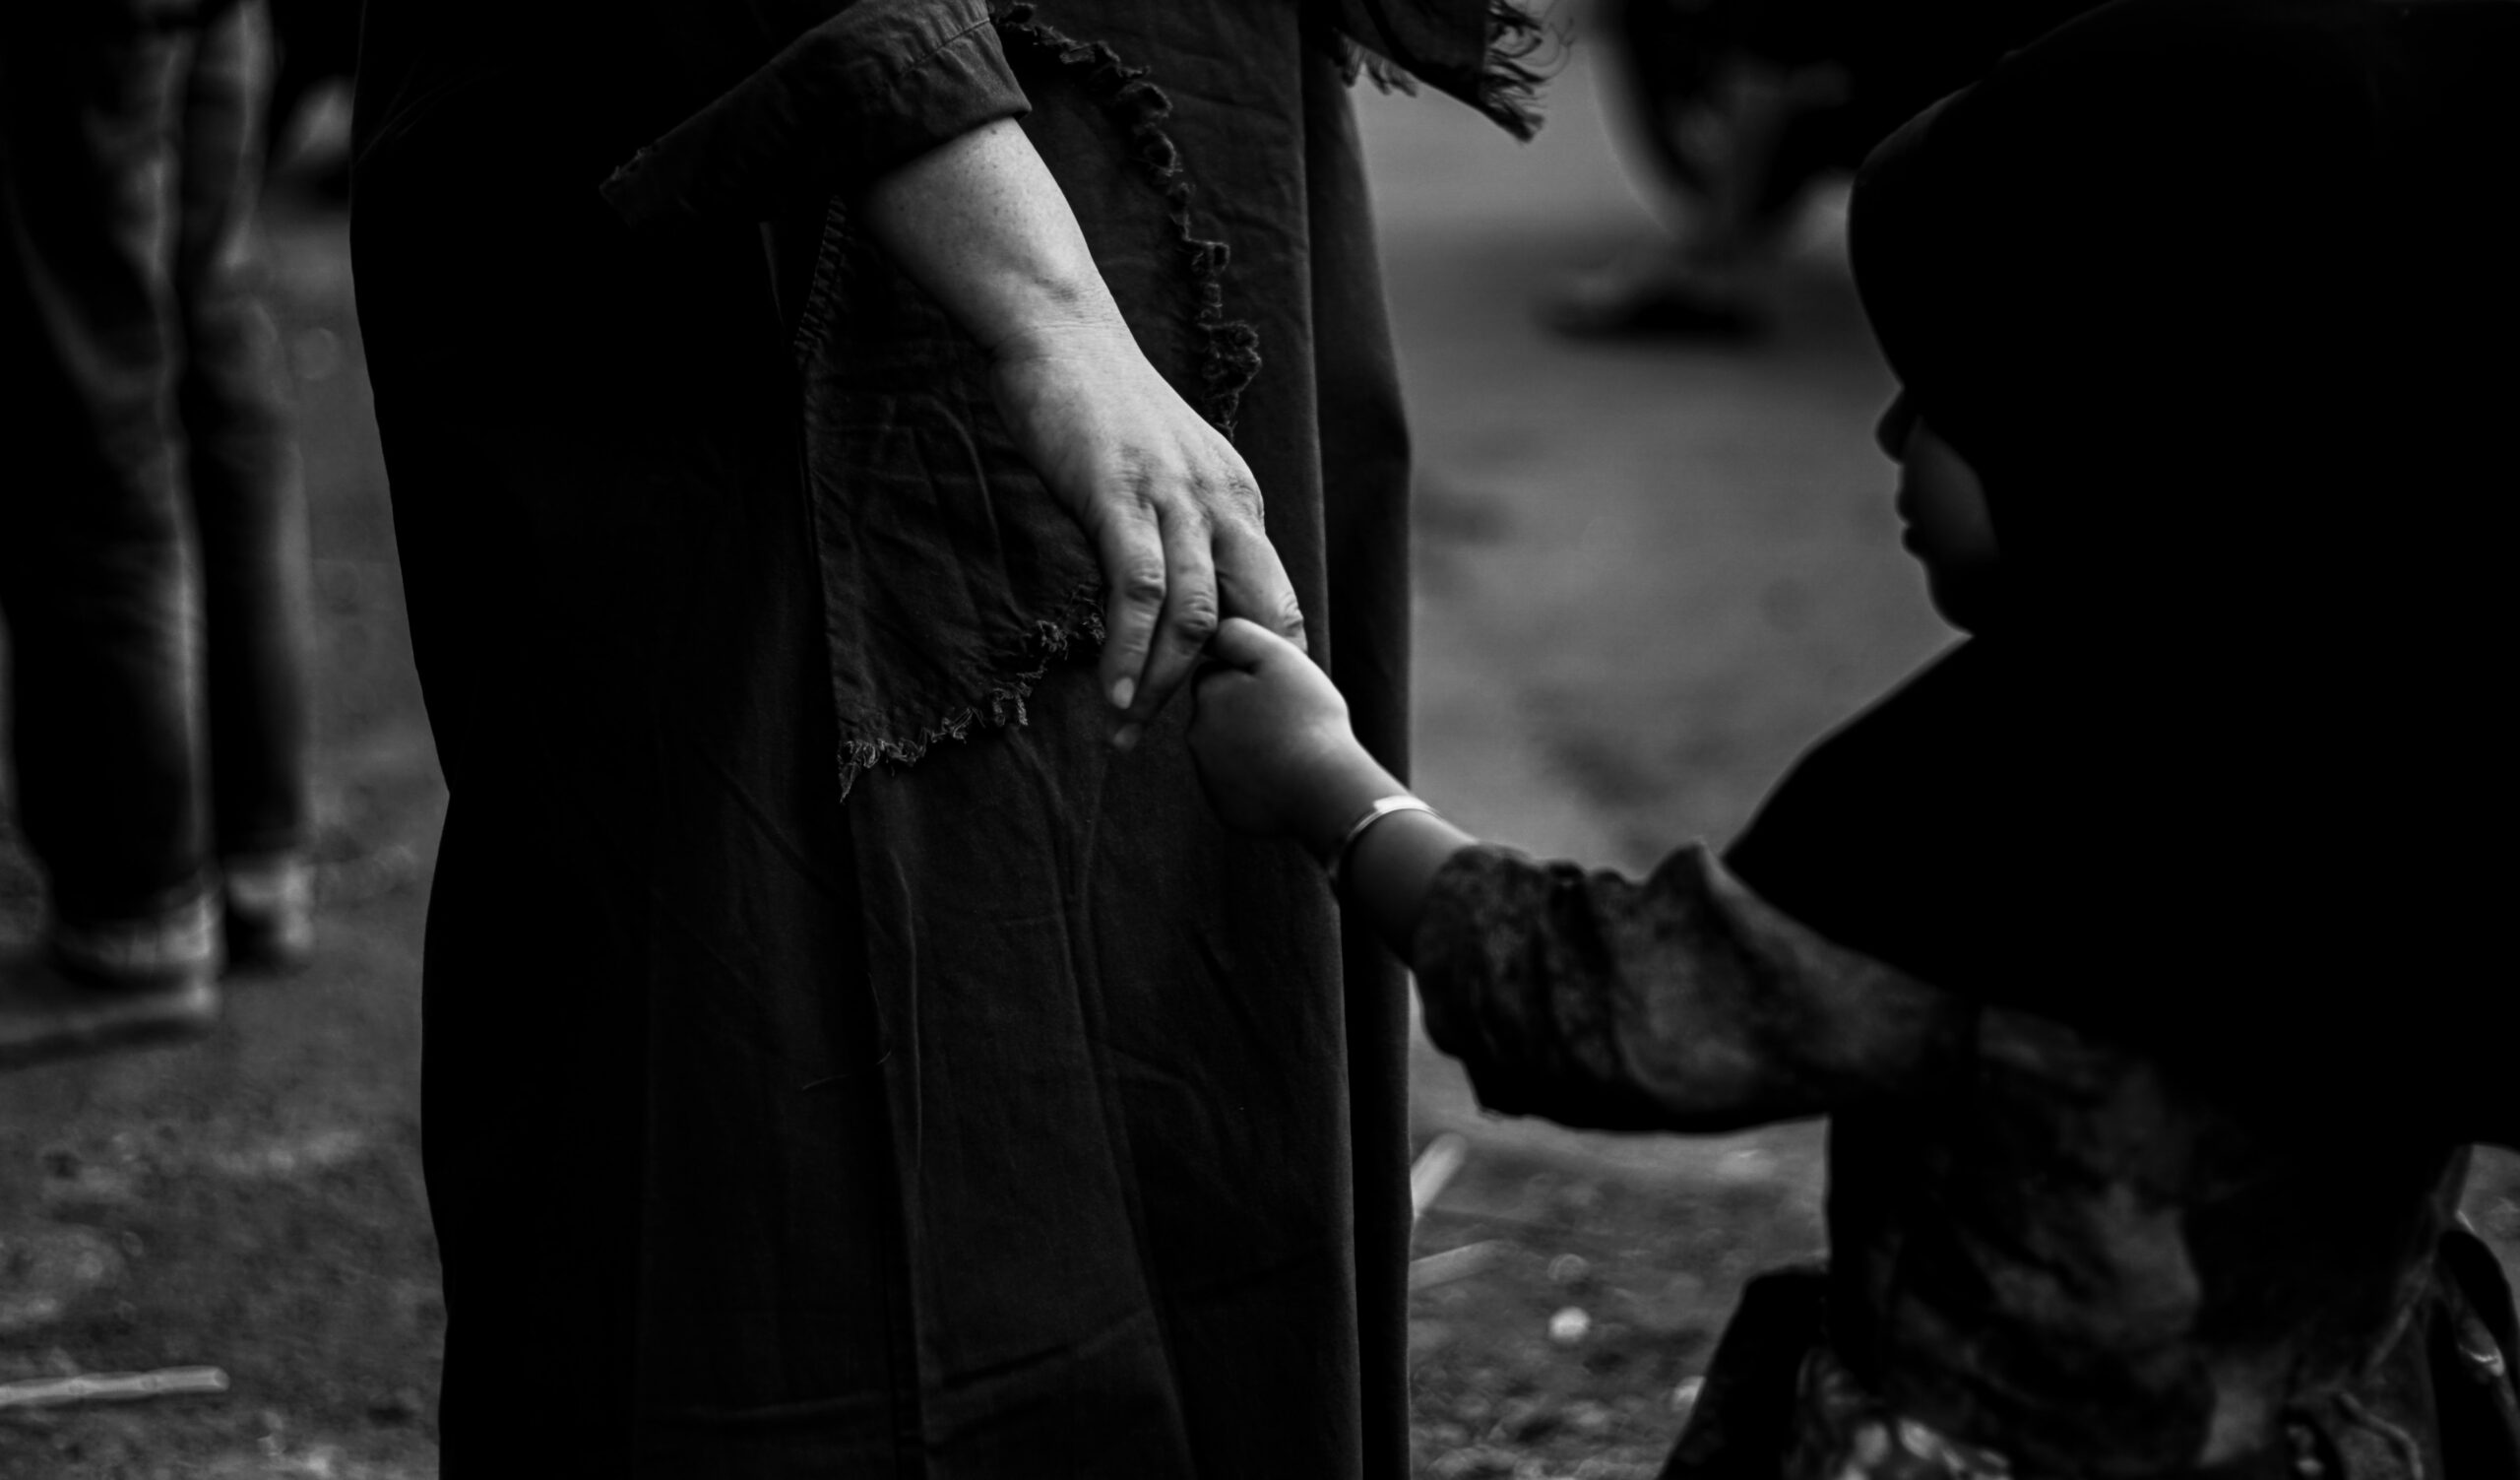 Child holding the hand of a women in black and white